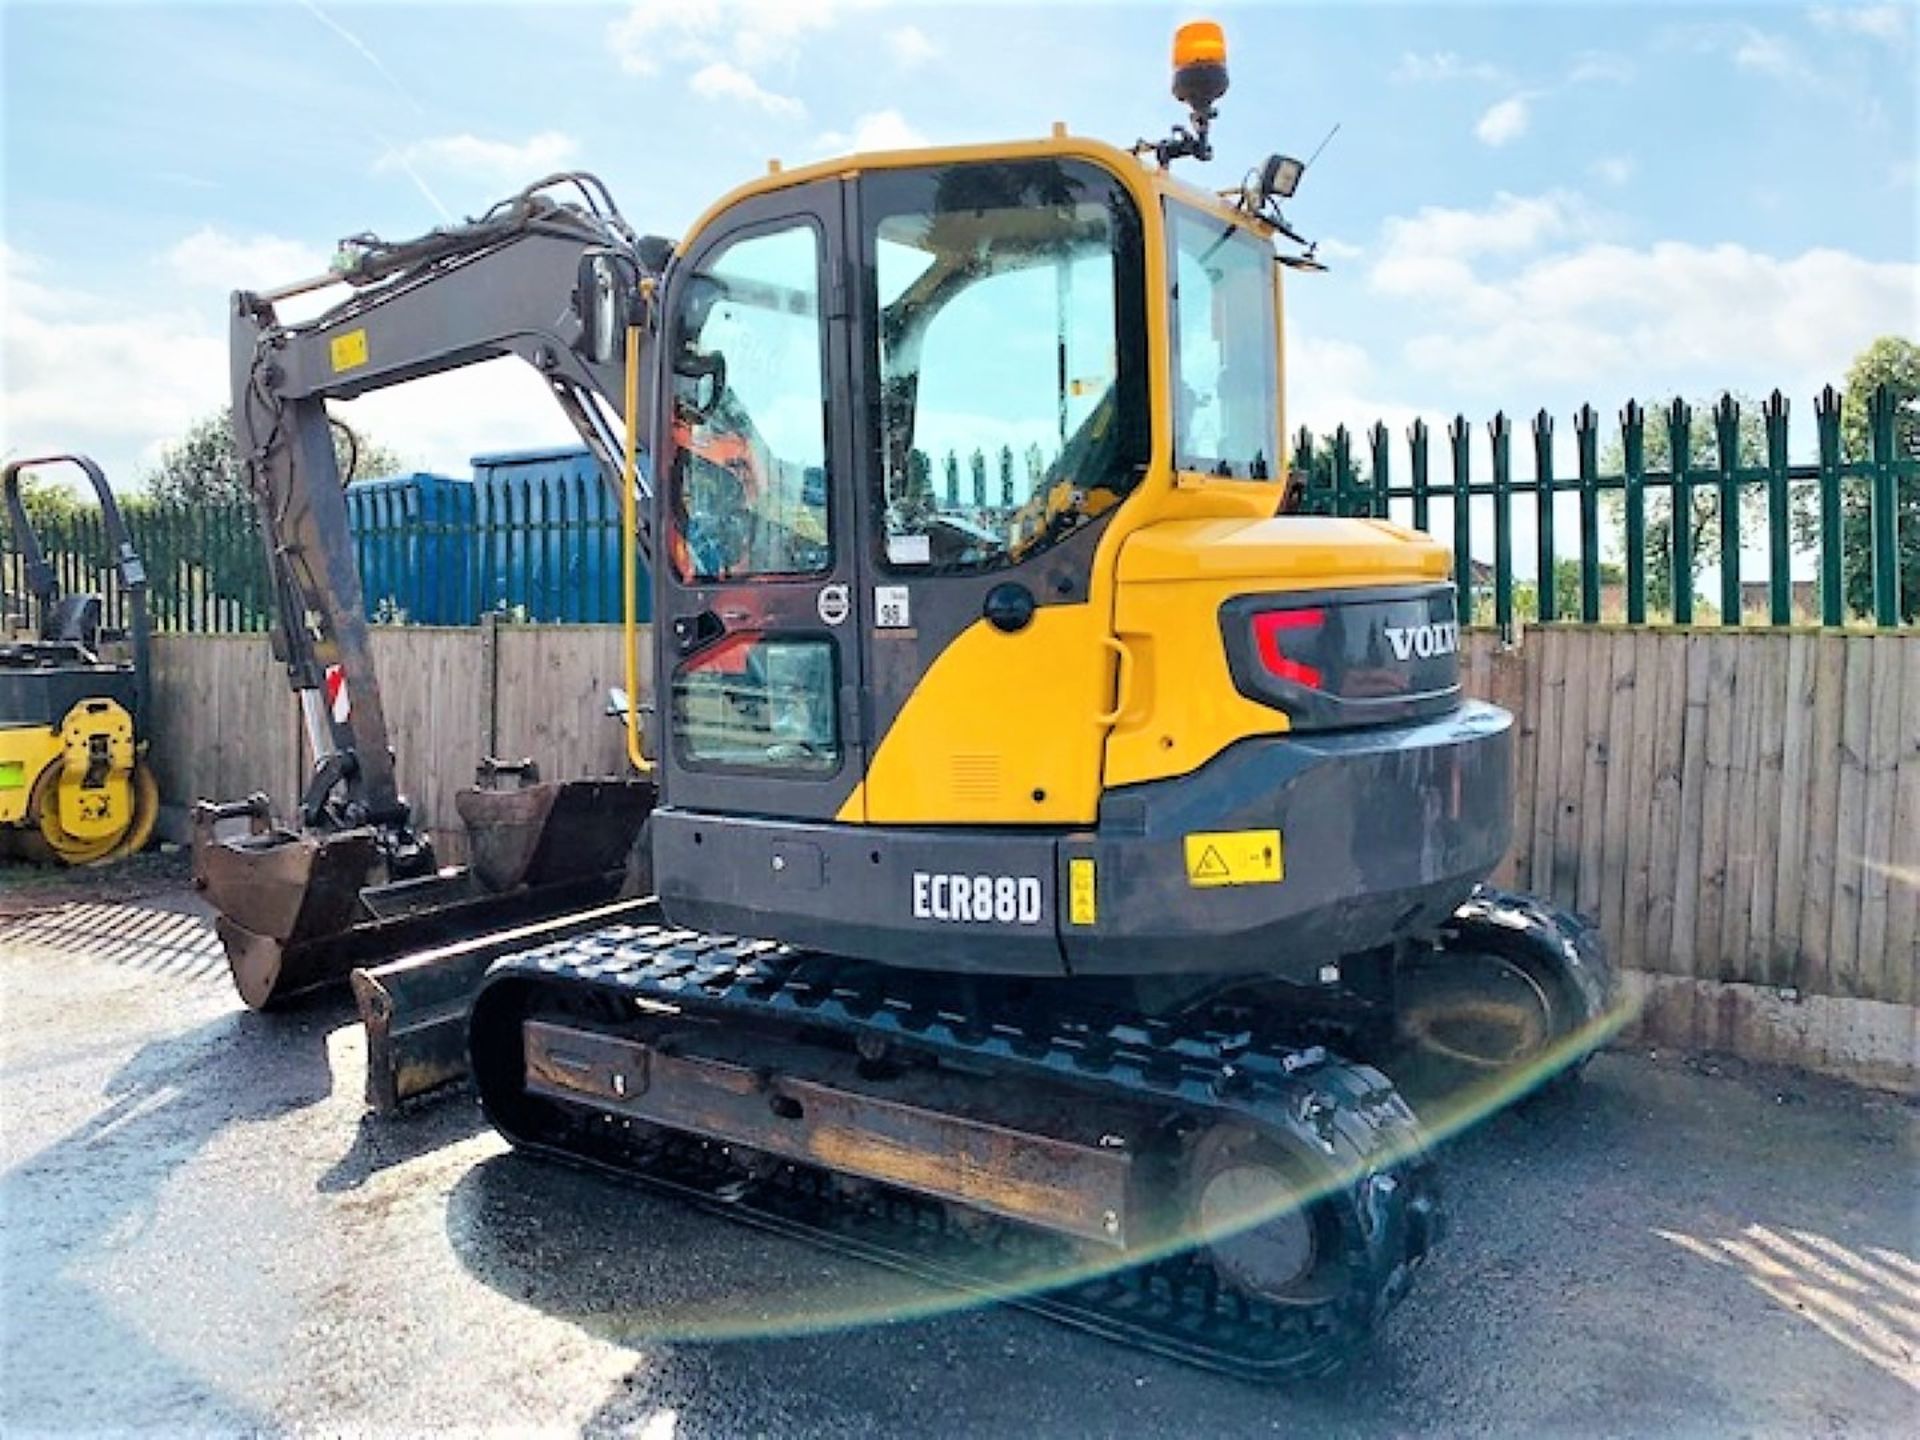 VOLVO ECR88D RUBBER TRACKED DIGGER / EXCAVATOR, YEAR 2015, 4148 HOURS, 3 X BUCKETS, AIR CON, RADIO - Image 3 of 17